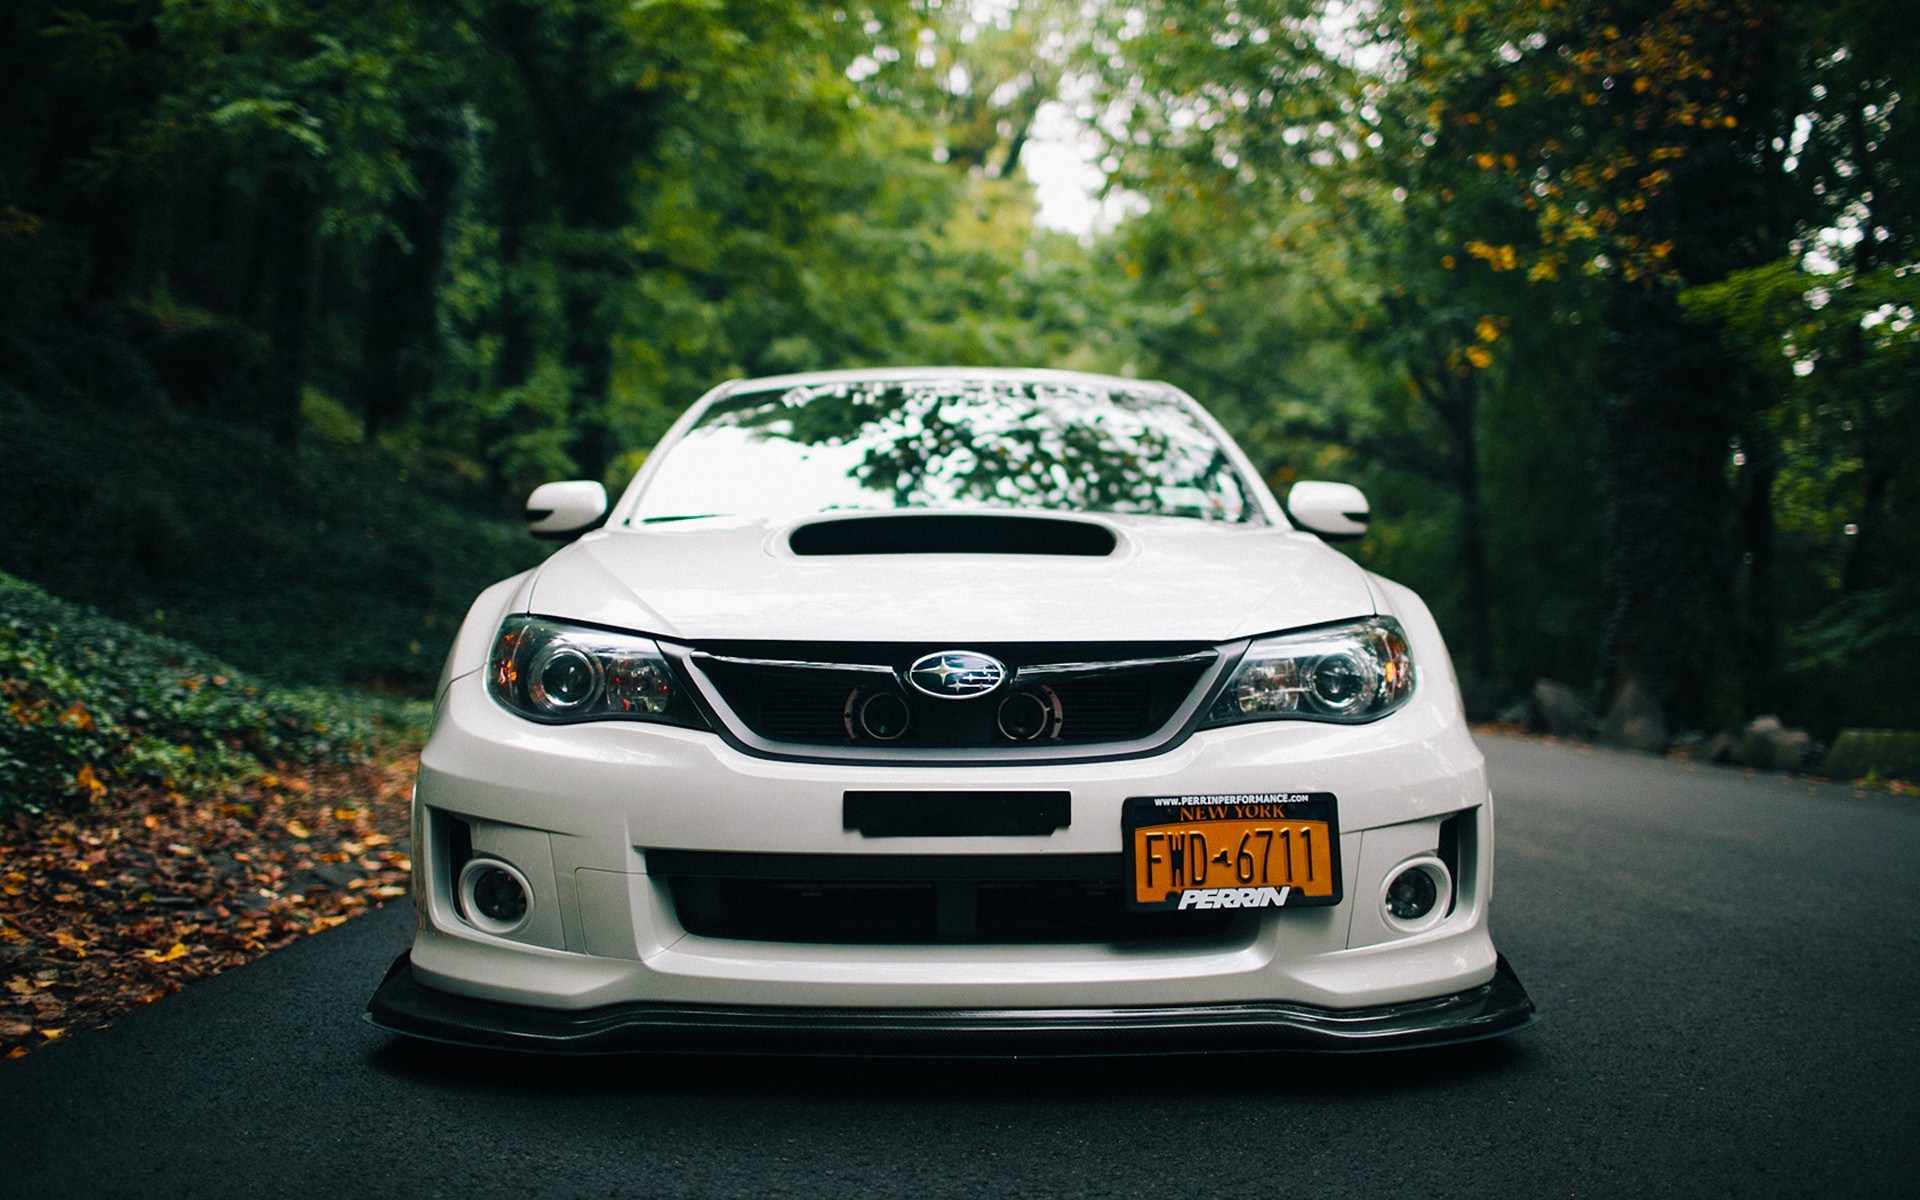 Wrx Wallpapers